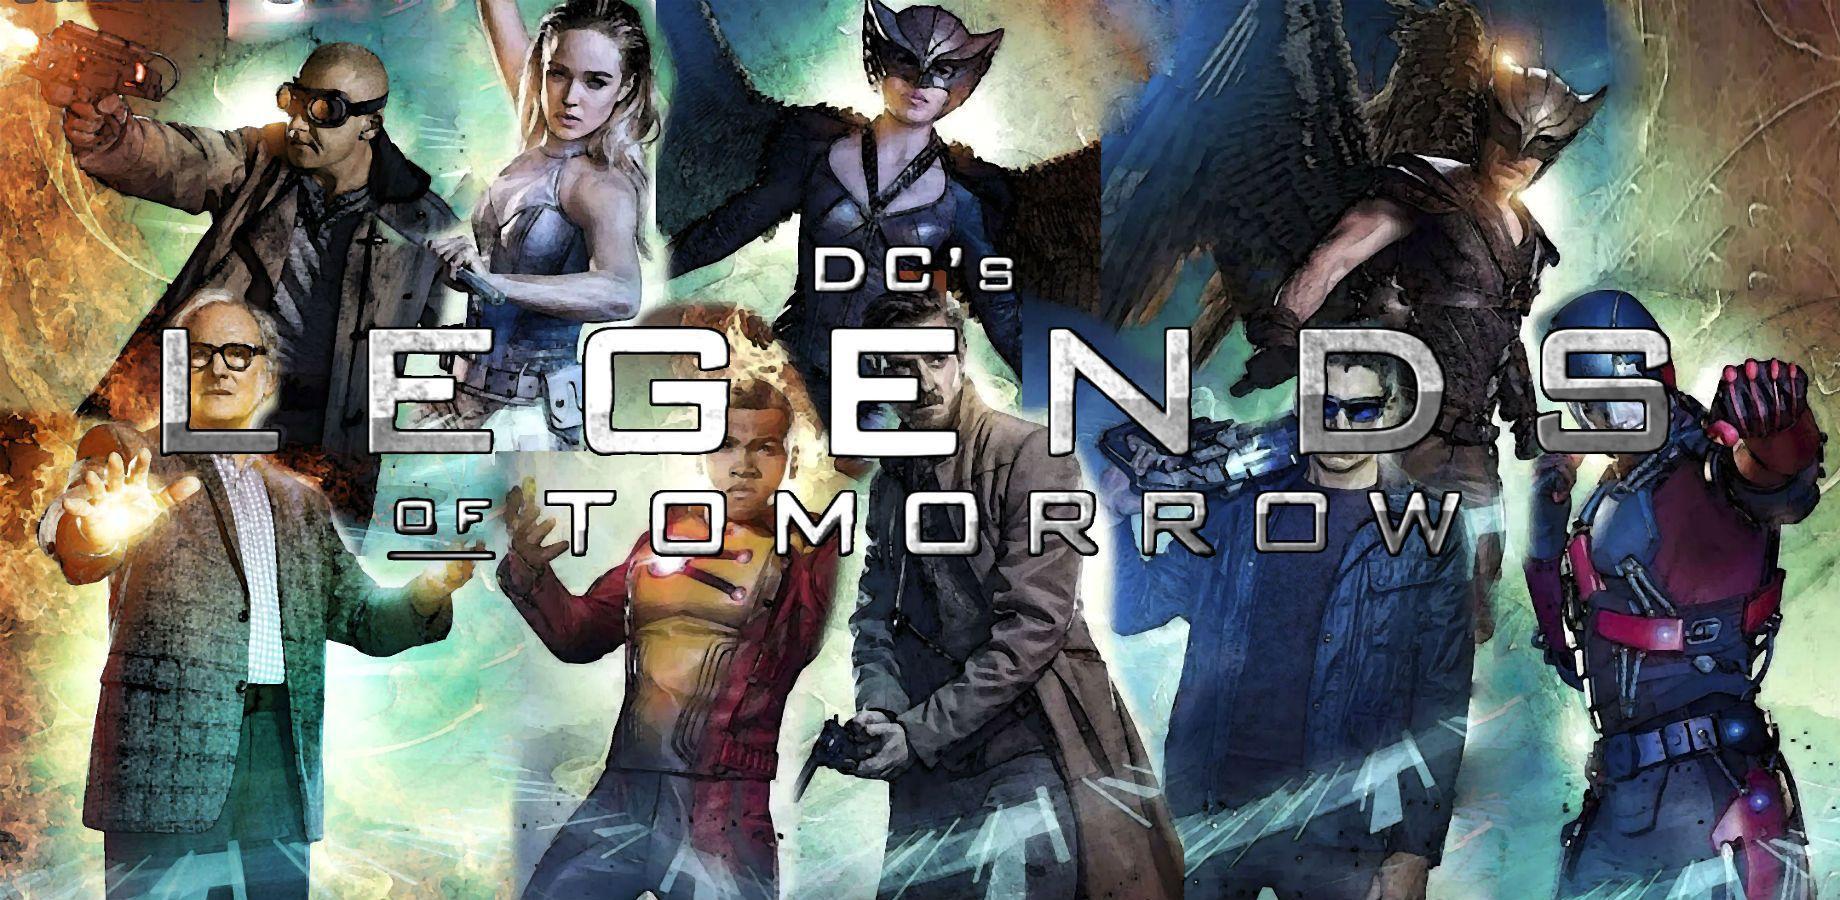 DC's Legends Of Tomorrow Wallpaper and Background Imagex900